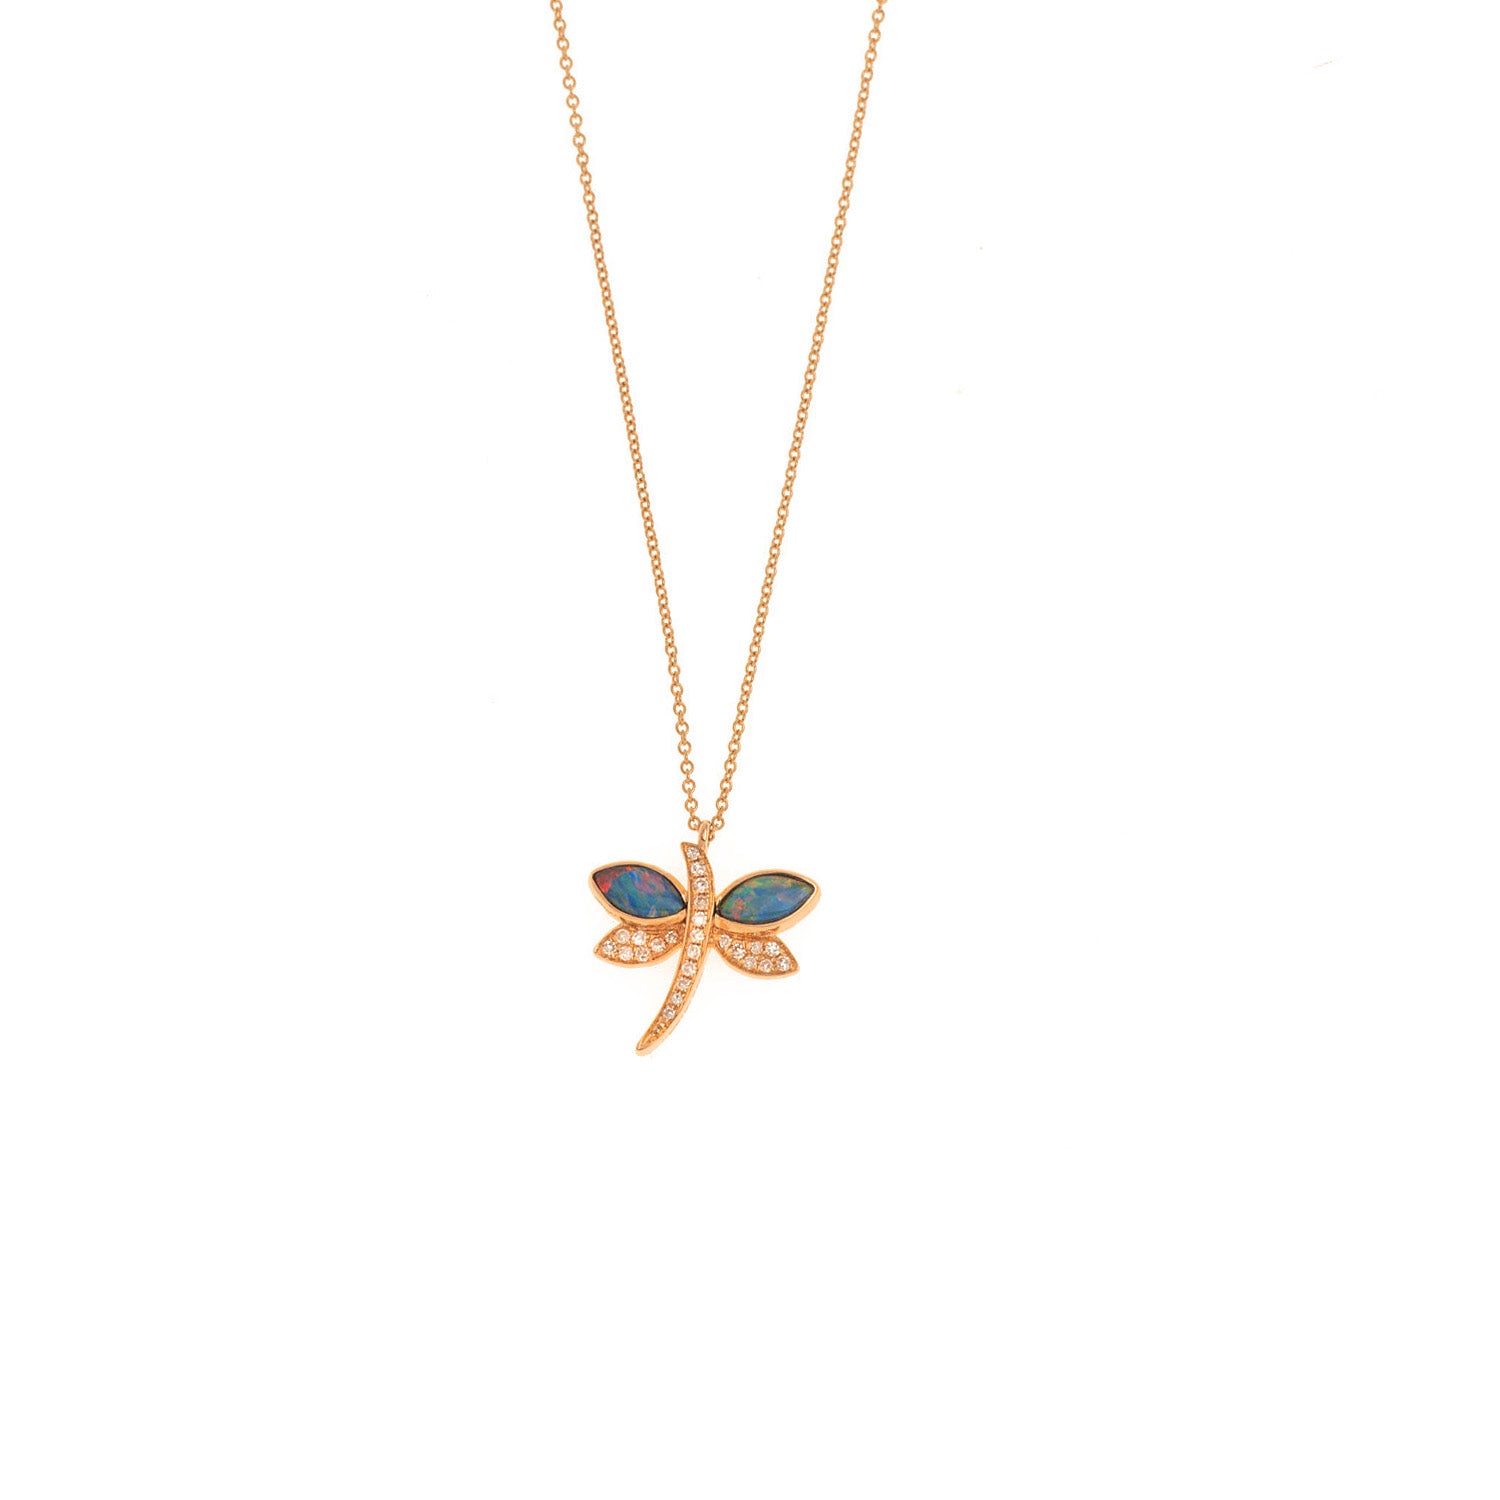 Symbol necklace. Heart, butterfly, round necklace. Gift necklace. Coral necklace. Precious stone necklace. Evil Eye necklace. Chain necklace. Easy to wear necklace. Anatol jewelry. Fine jewelry. Golden Hall. Kifissia. Athens. Χρυσό κολιέ. Κολιέ με διαμάντια. Χρυσά κοσμήματα. Κηφισιά. Κολιέ με μπριγιάν.